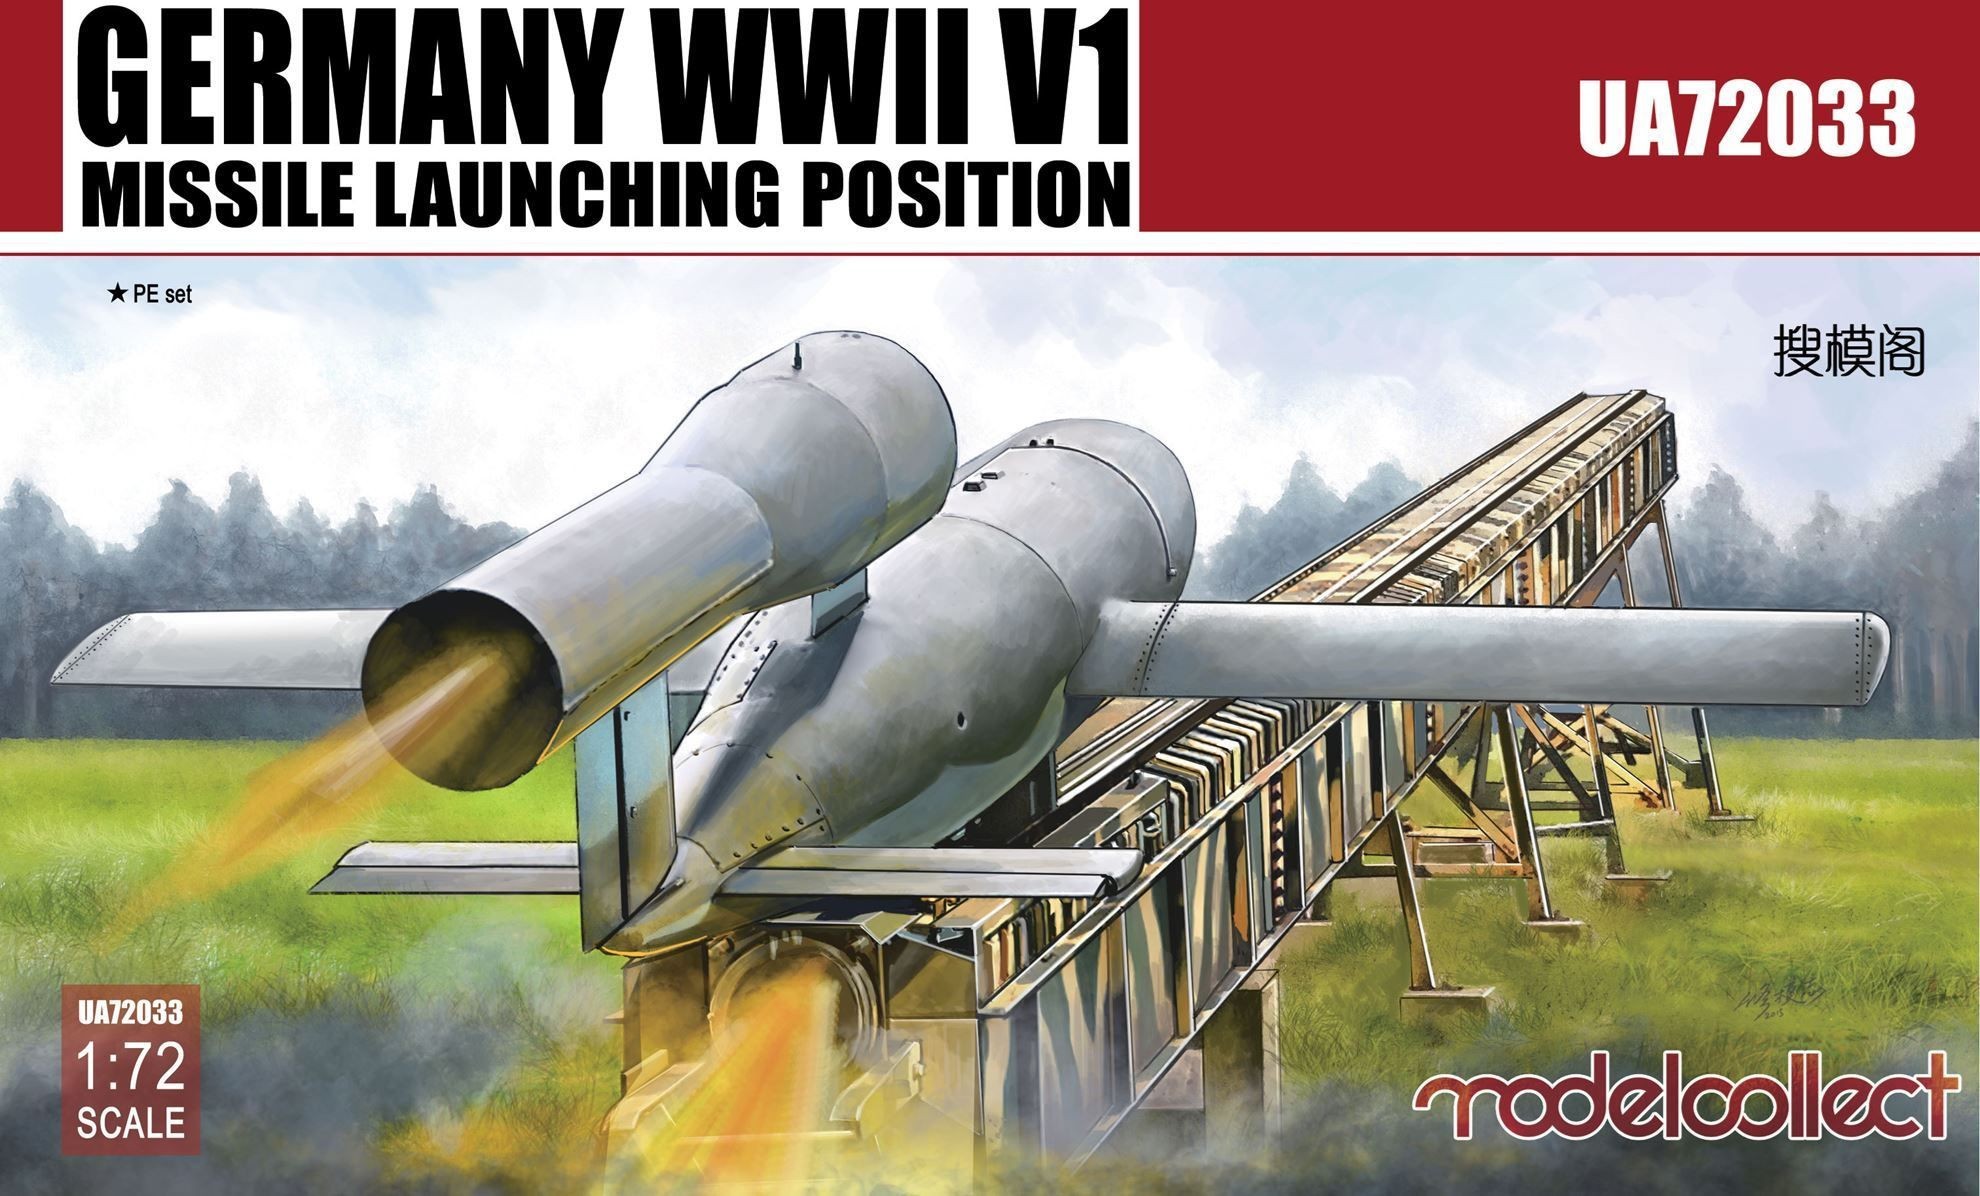 Maquette Modelcollect Lancement du missile Allemagne WWII V1 positi 2 